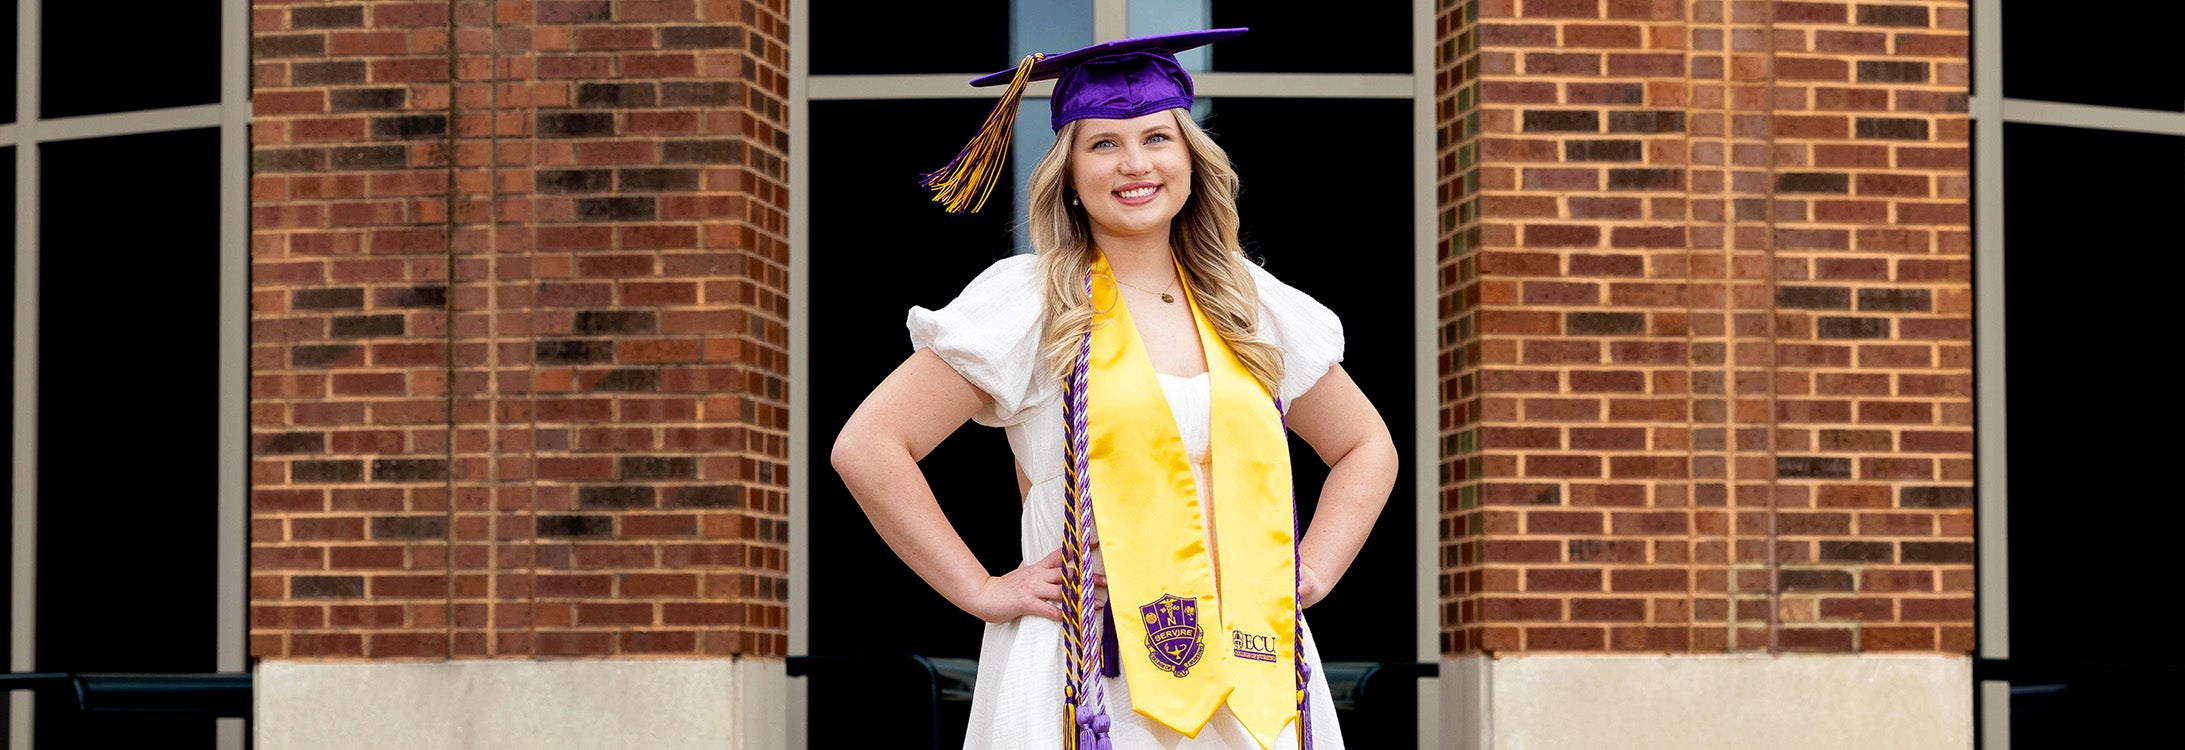 Lauren Briggs’ is a graduate of ECU’s College of Nursing and will return to Pirate Nation for her graduate studies. (Photo by Rhett Butler)